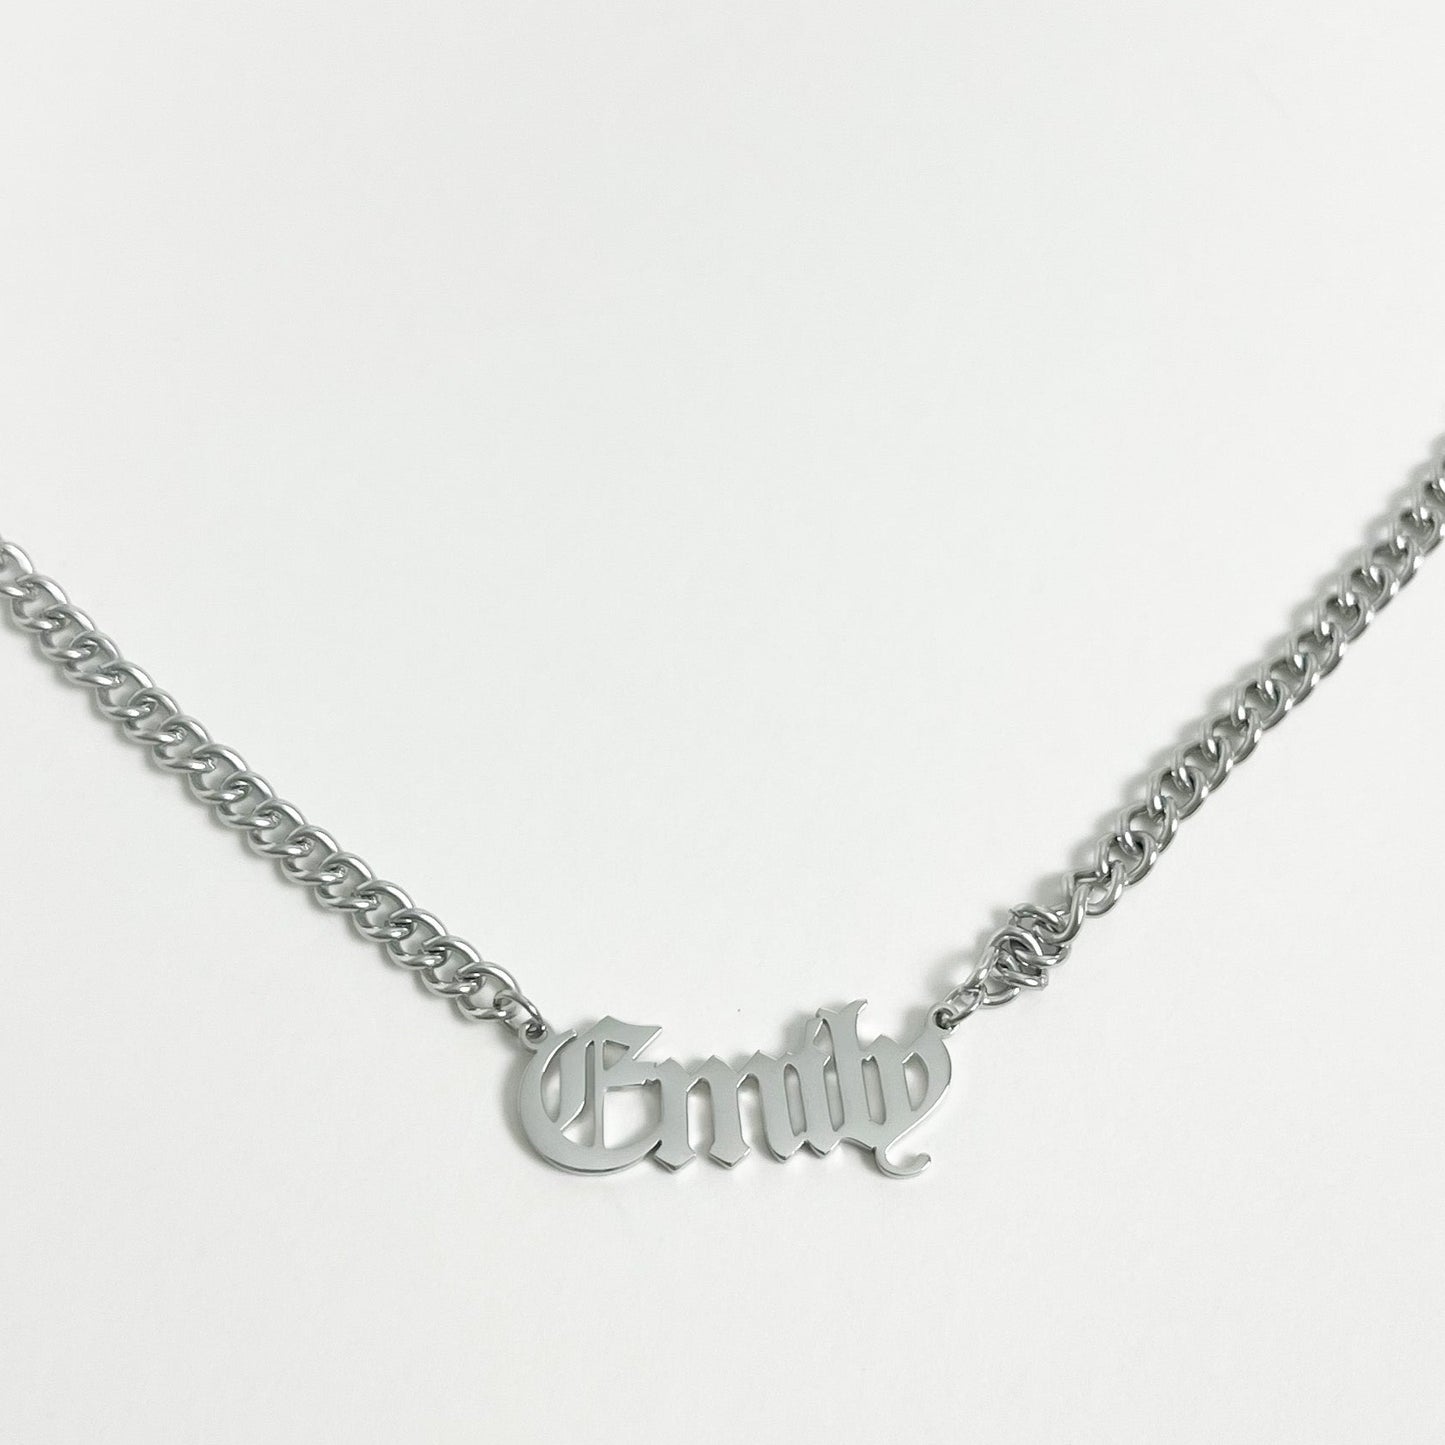 SILVER PERSONALISED BOLD CHAIN NAME NECKLACE